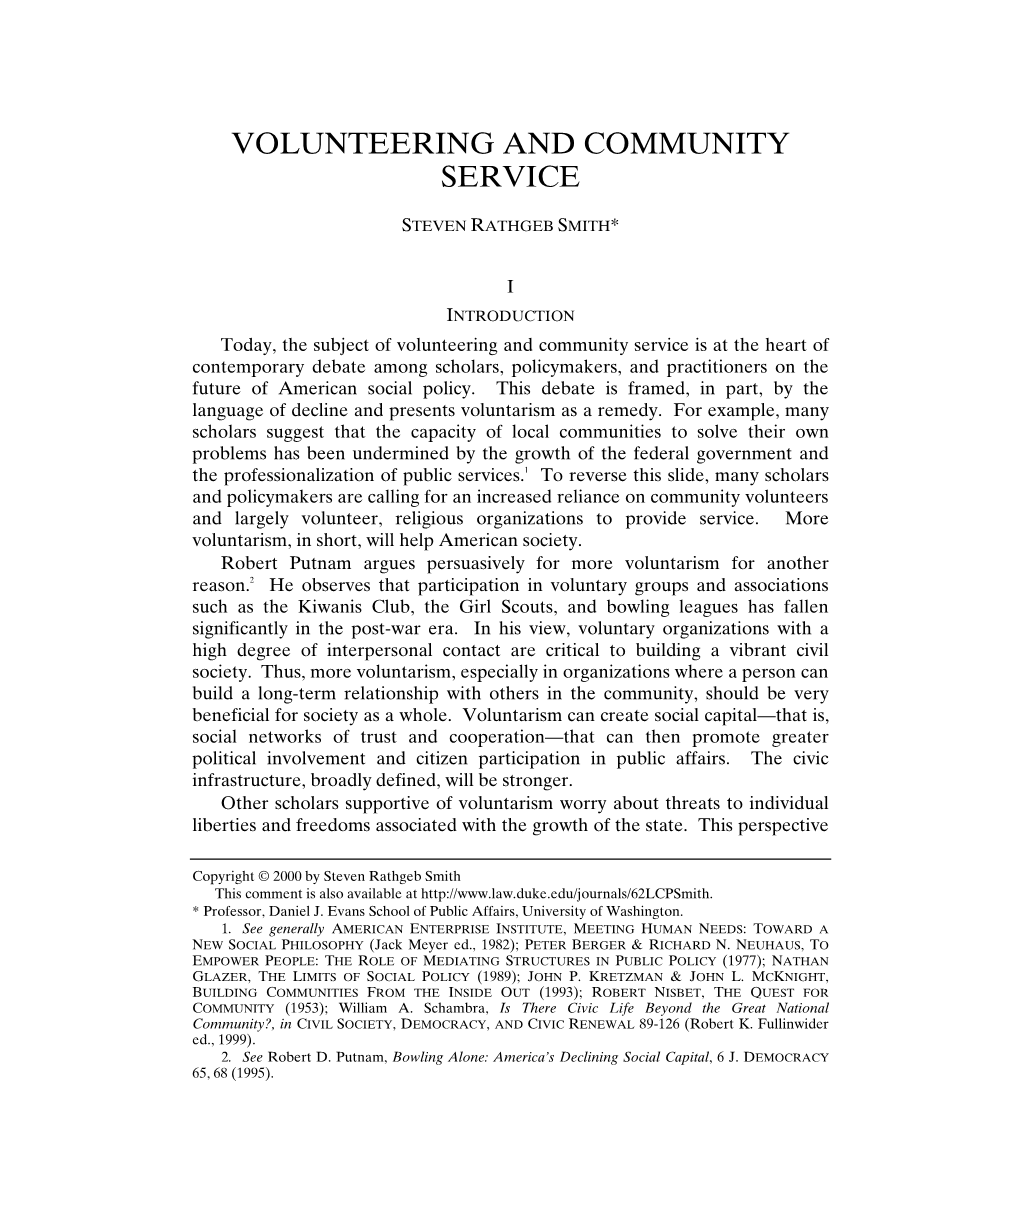 Comment: Volunteering and Community Service